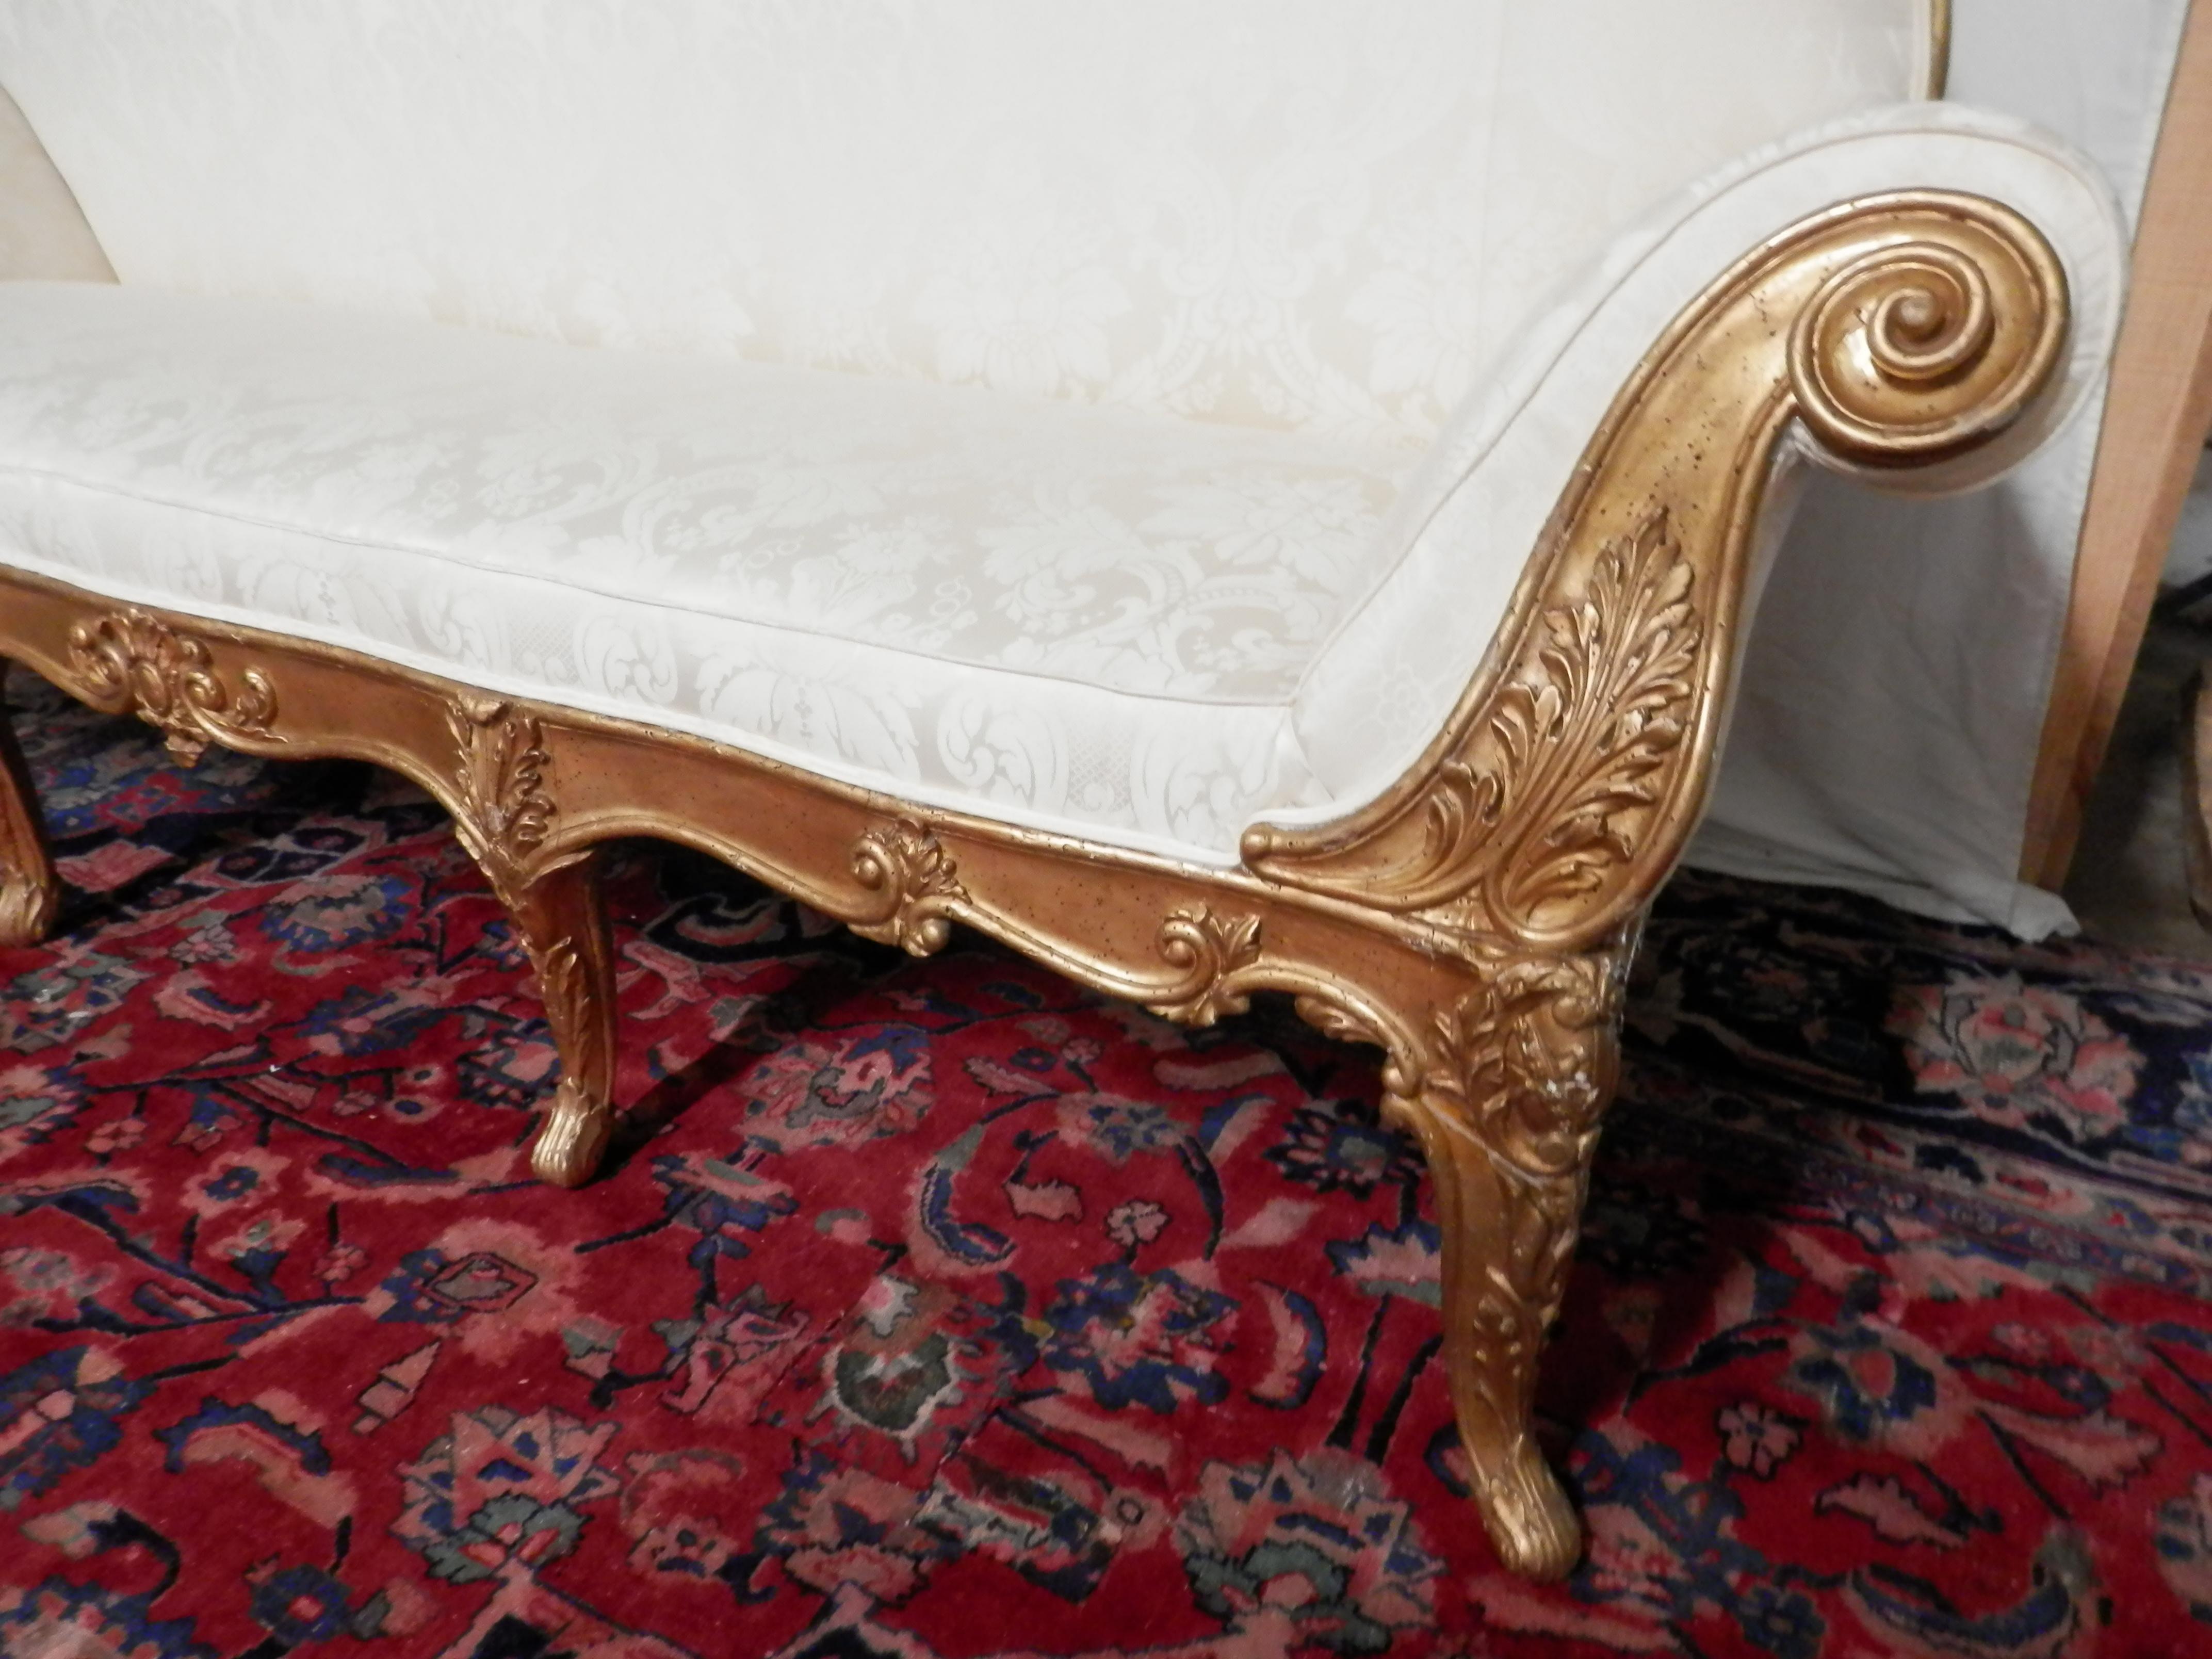 Early 19th century Italian Louis XV gilt carved sofa. Beautifully carved with original gilding. Covered in a cream upholstery with floral detail.